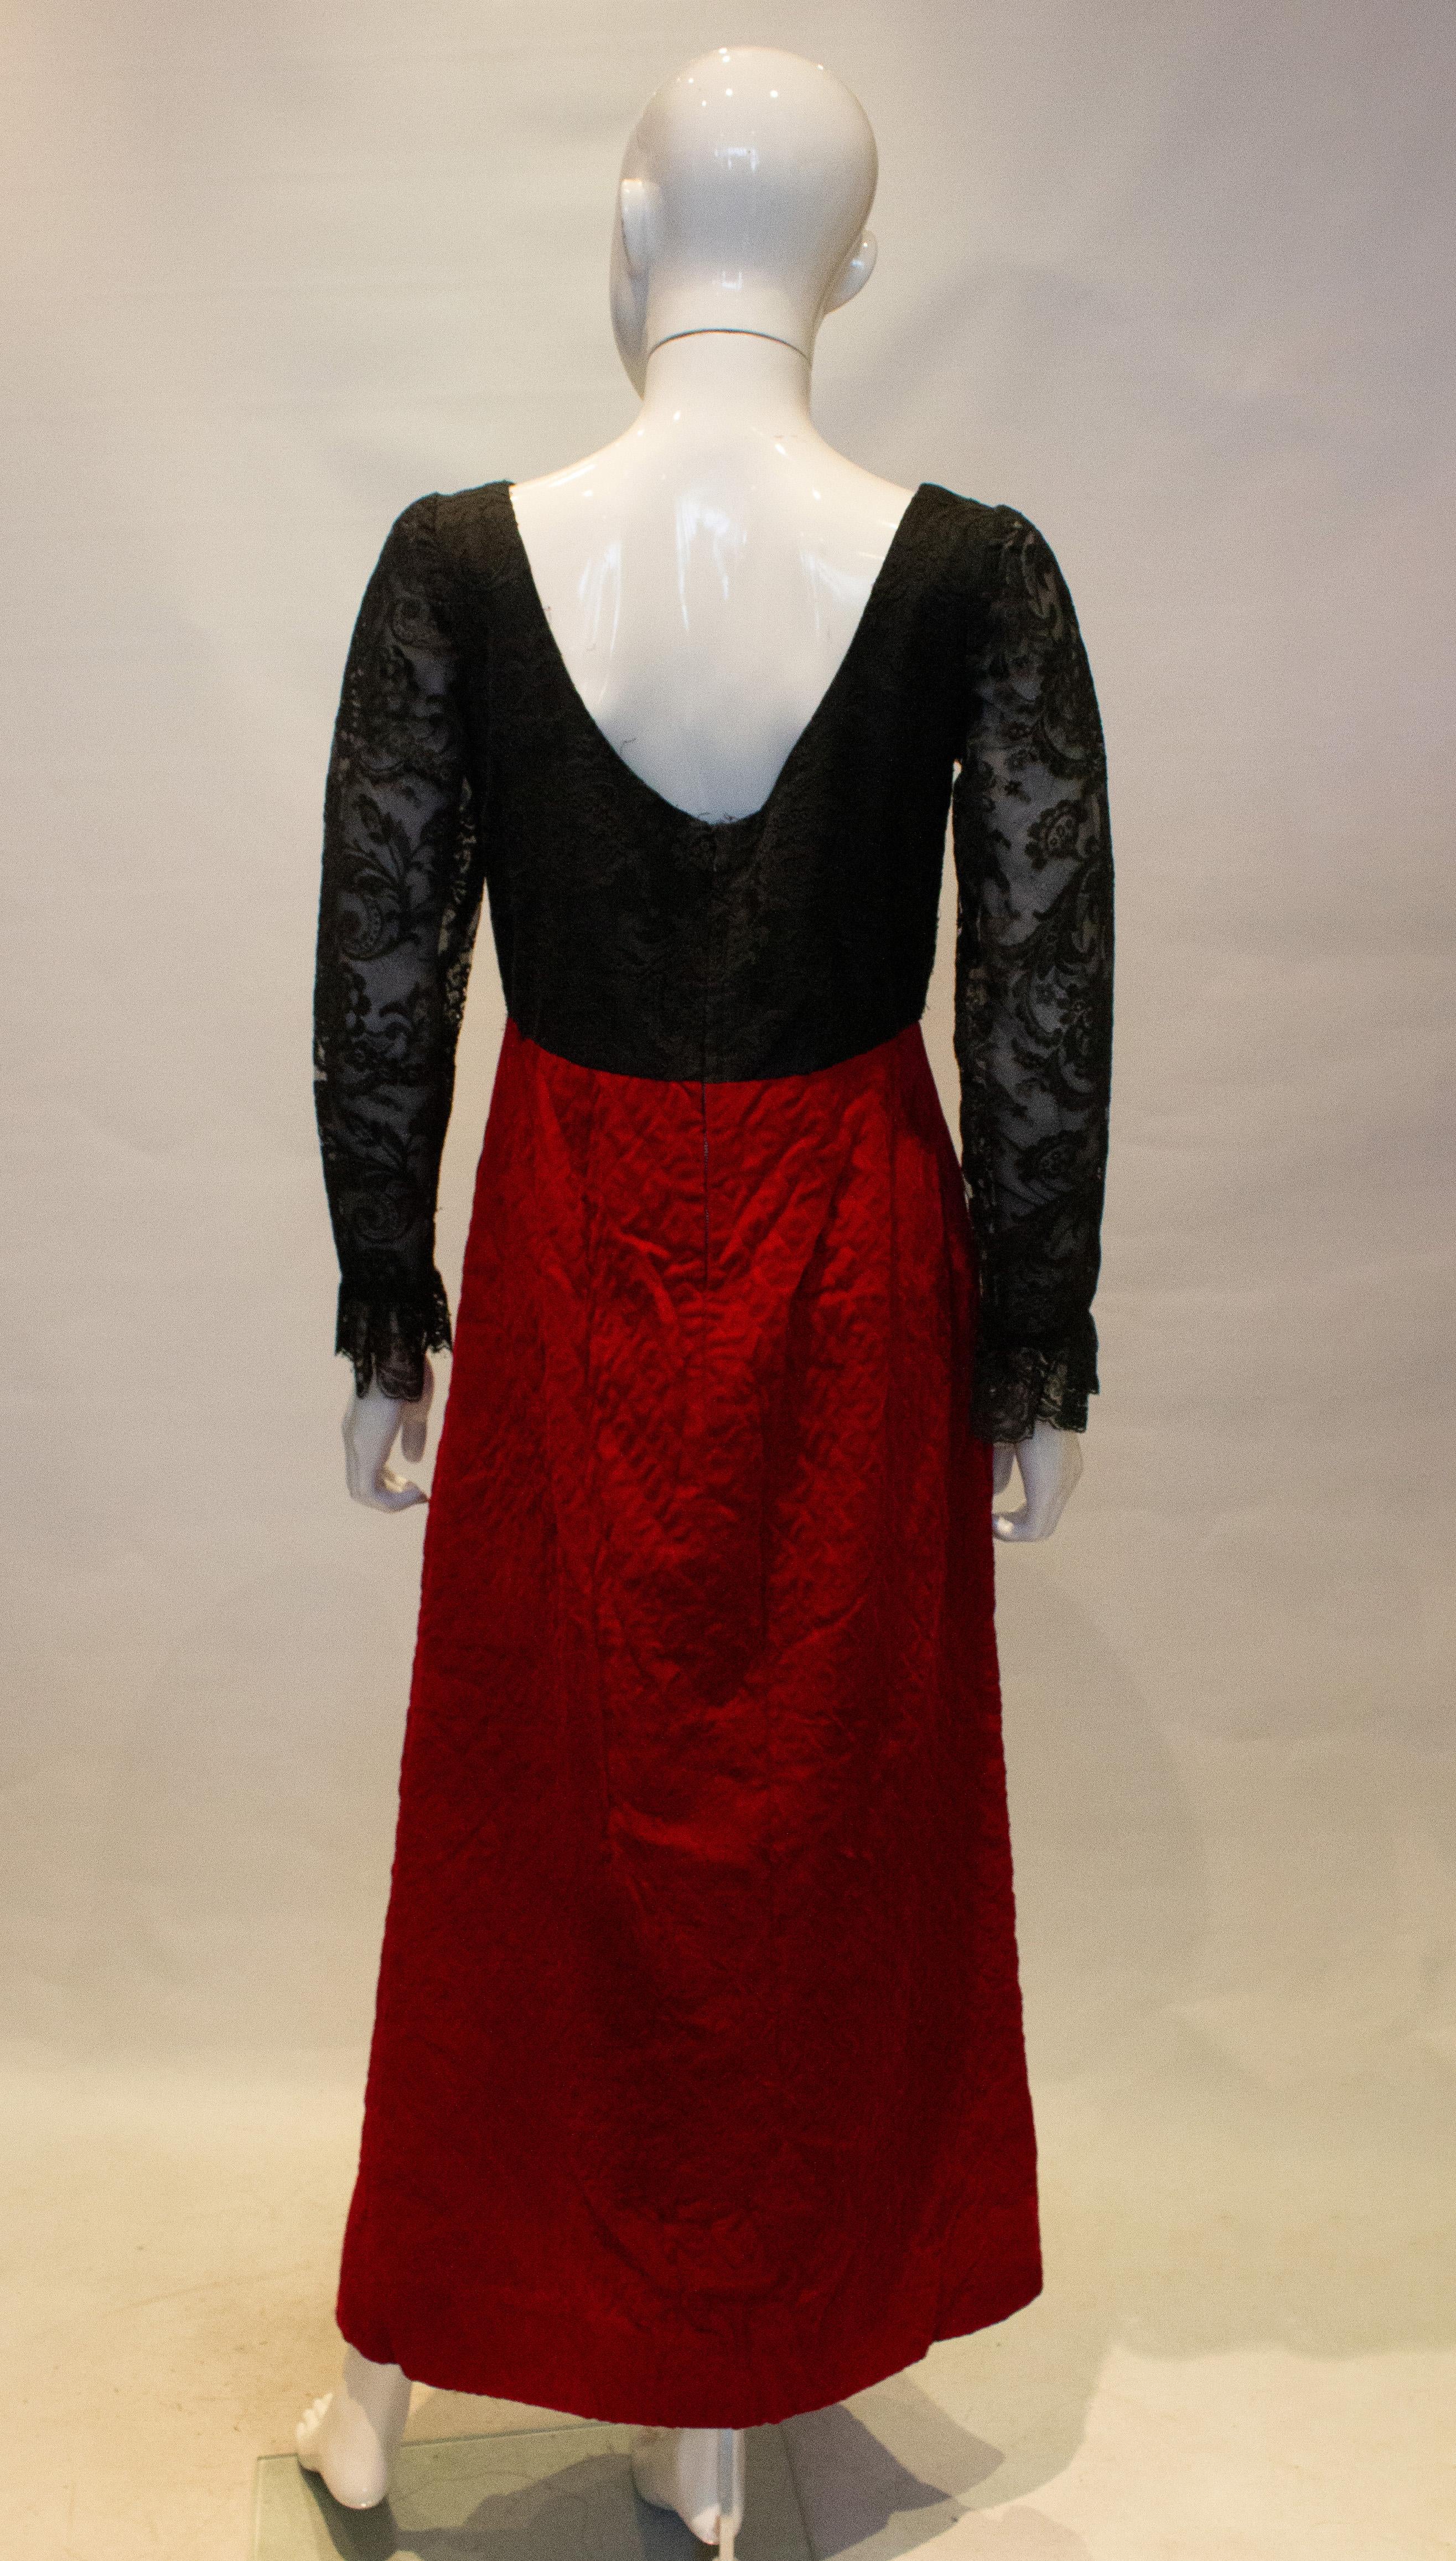 A great vintage evening dress for Fall /Winter by Irving Ross. The dress has a pretty black  lace bodice with a red quilted velvet skirt. Measurements: Bust 36'',length 54'' plus 4'' hem.